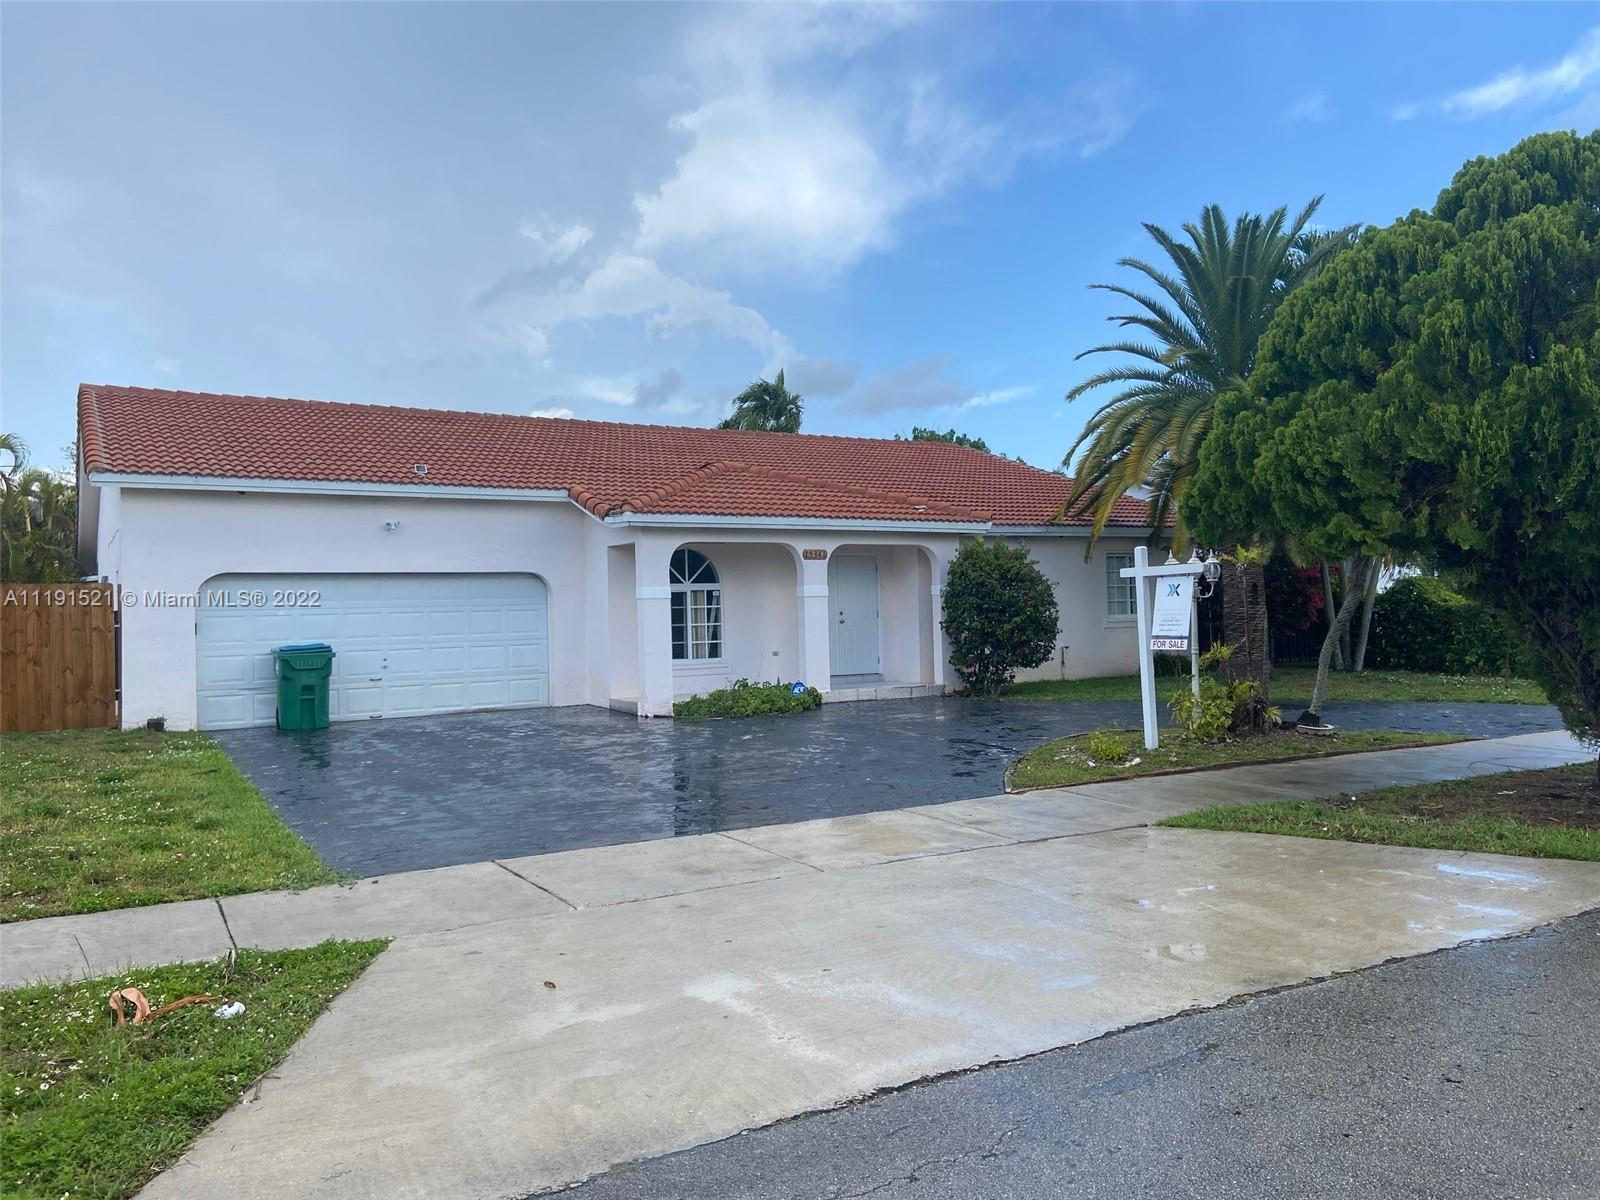 Single Home, It has 3 bedrooms and 2 bathrooms, double garage, SS appliances, a whole fenced yard creating a wonderful place for enjoying. Quiet neighborhood, NO ASSOCIATION, close to Shopping Plaza, Publix, Parks, Miami Zoo, and easy access to Florida Turnpike. Don’t miss the chance to be the first!!!